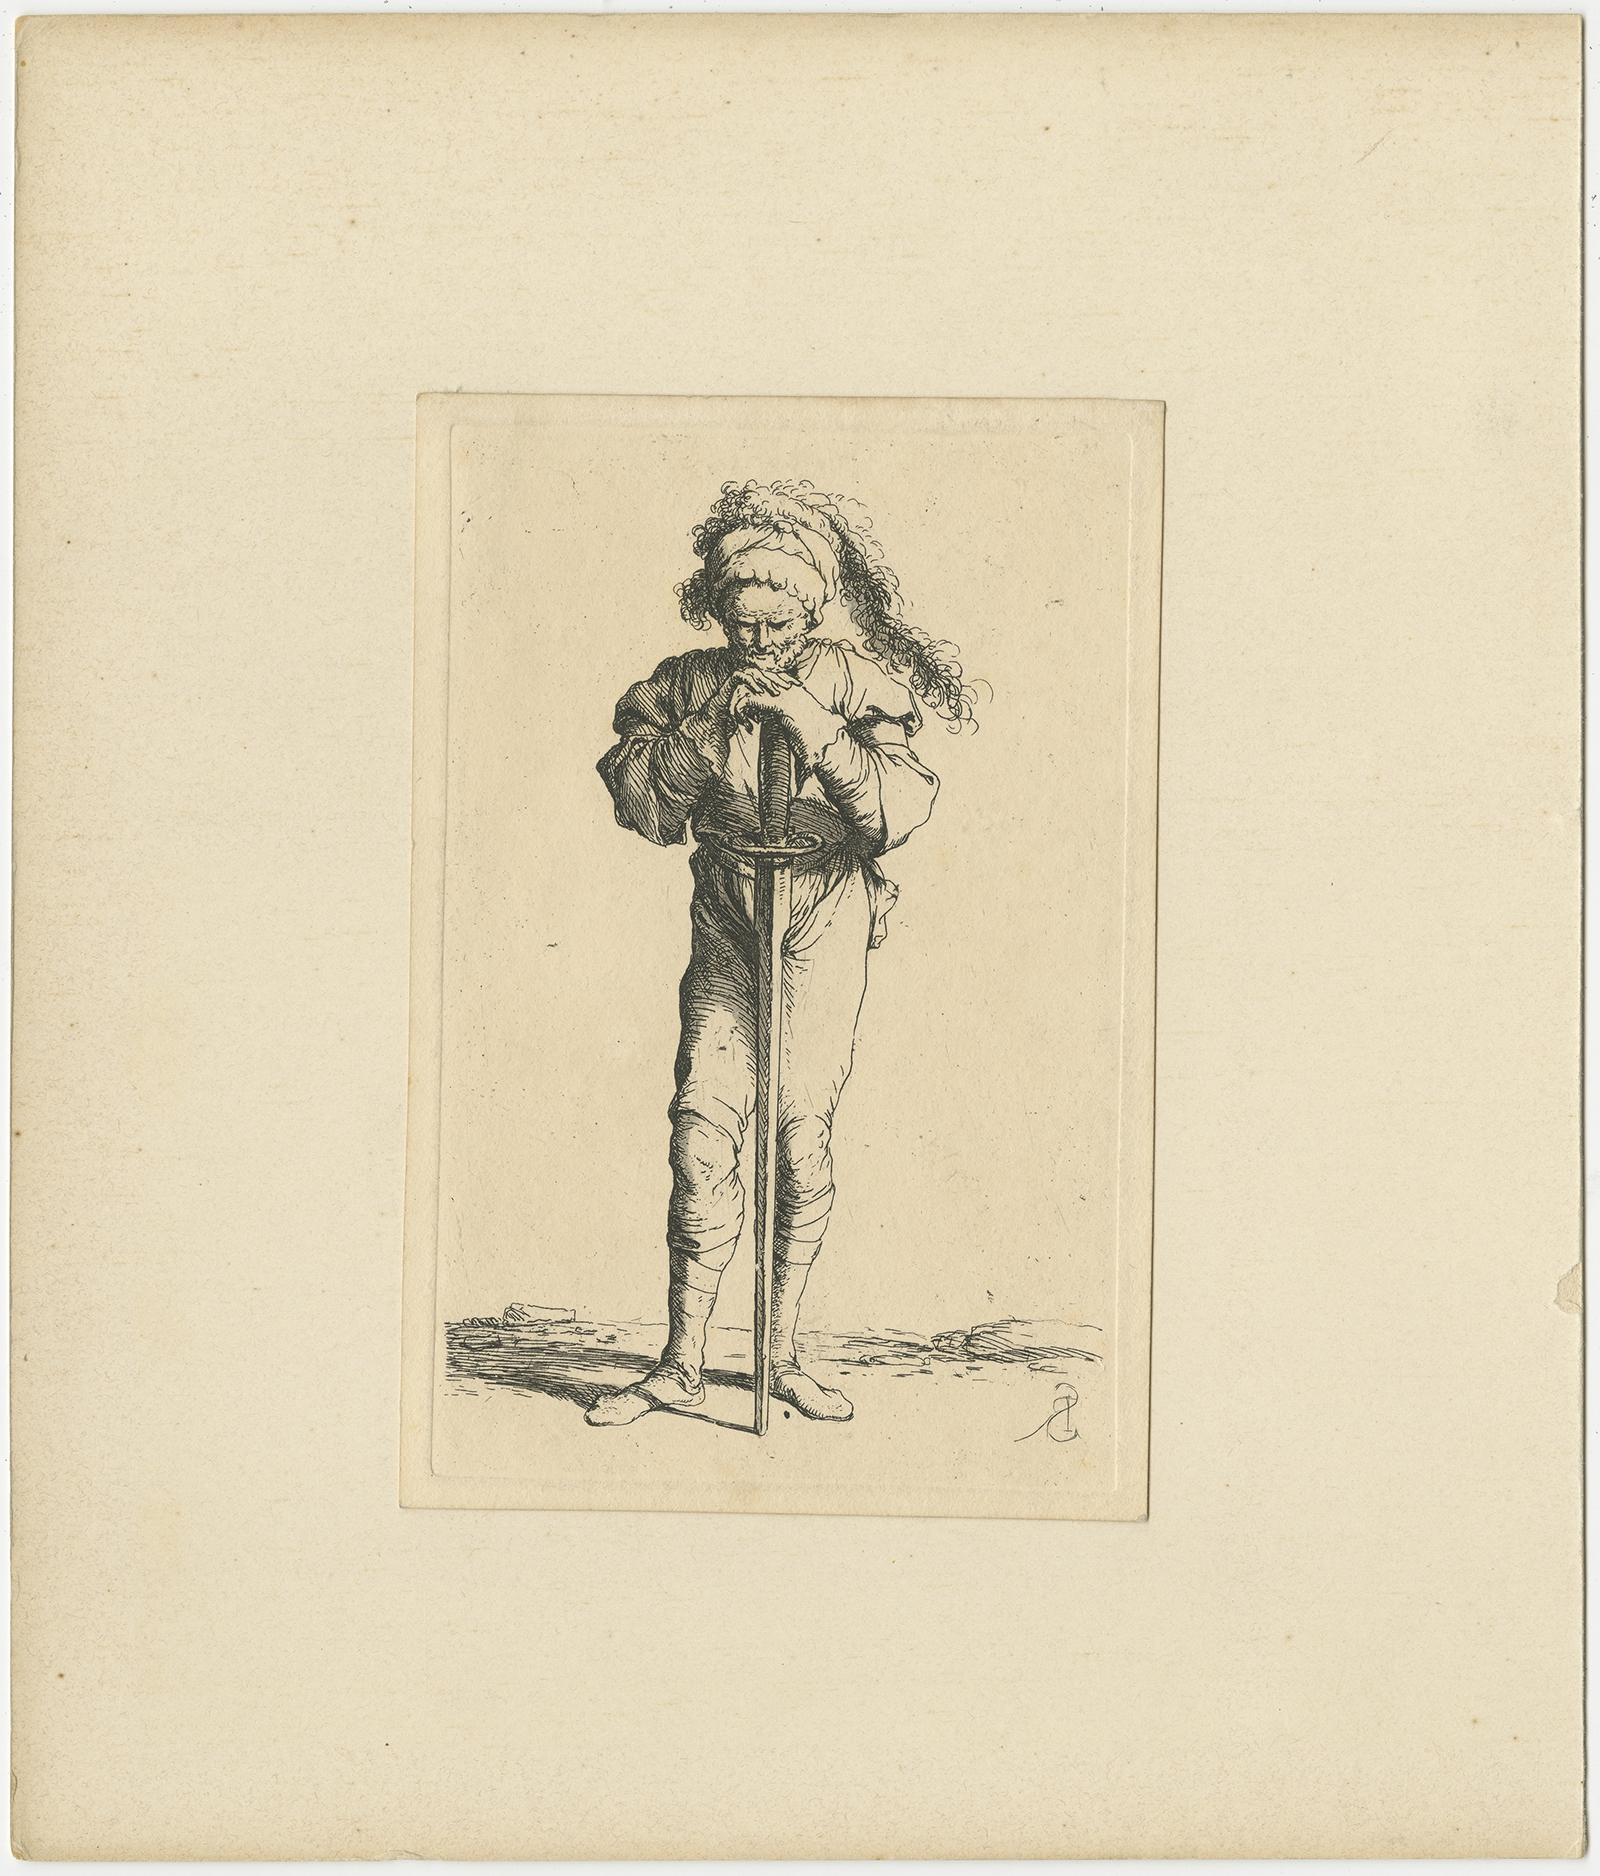 Etching of a warrior standing and leaning on a long sword. Originates from a figurine series 1653-1658, signed with his monogram.

Artists and engravers: Salvator Rosa (June 20 or July 21, 1615 – March 15, 1673) was an Italian Baroque painter, poet,